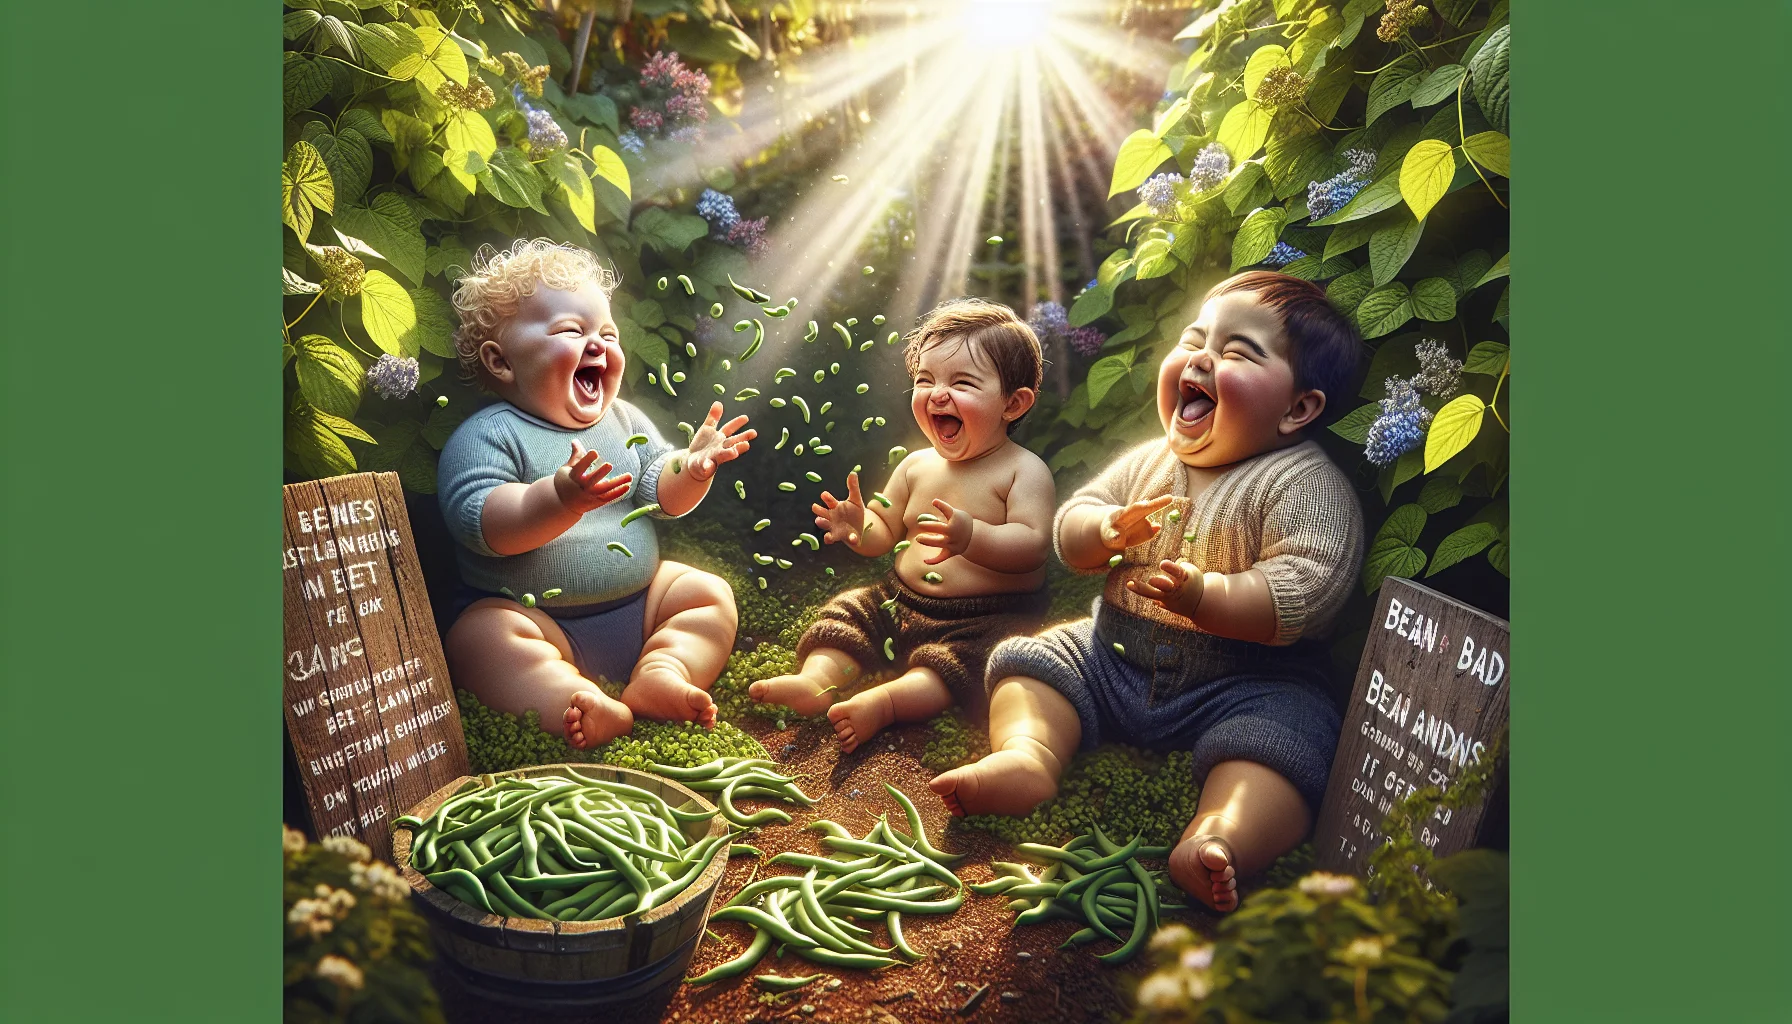 Craft an image capturing a humorous gardening scenario. Show chubby, giggly Caucasian and South Asian toddlers sitting amidst a patch of bush green beans. They're playfully tossing beans in the air, their laughter echoing throughout the garden. Radiant sunshine streams over them, accentuating the lush green foliage around, and casting soft, dappled light that dances on their faces. A weathered wooden signboard rests nearby, the playful scribbling on it reading 'Bean Bandits at work'. This lighthearted setting should inspire a love for gardening and nature.